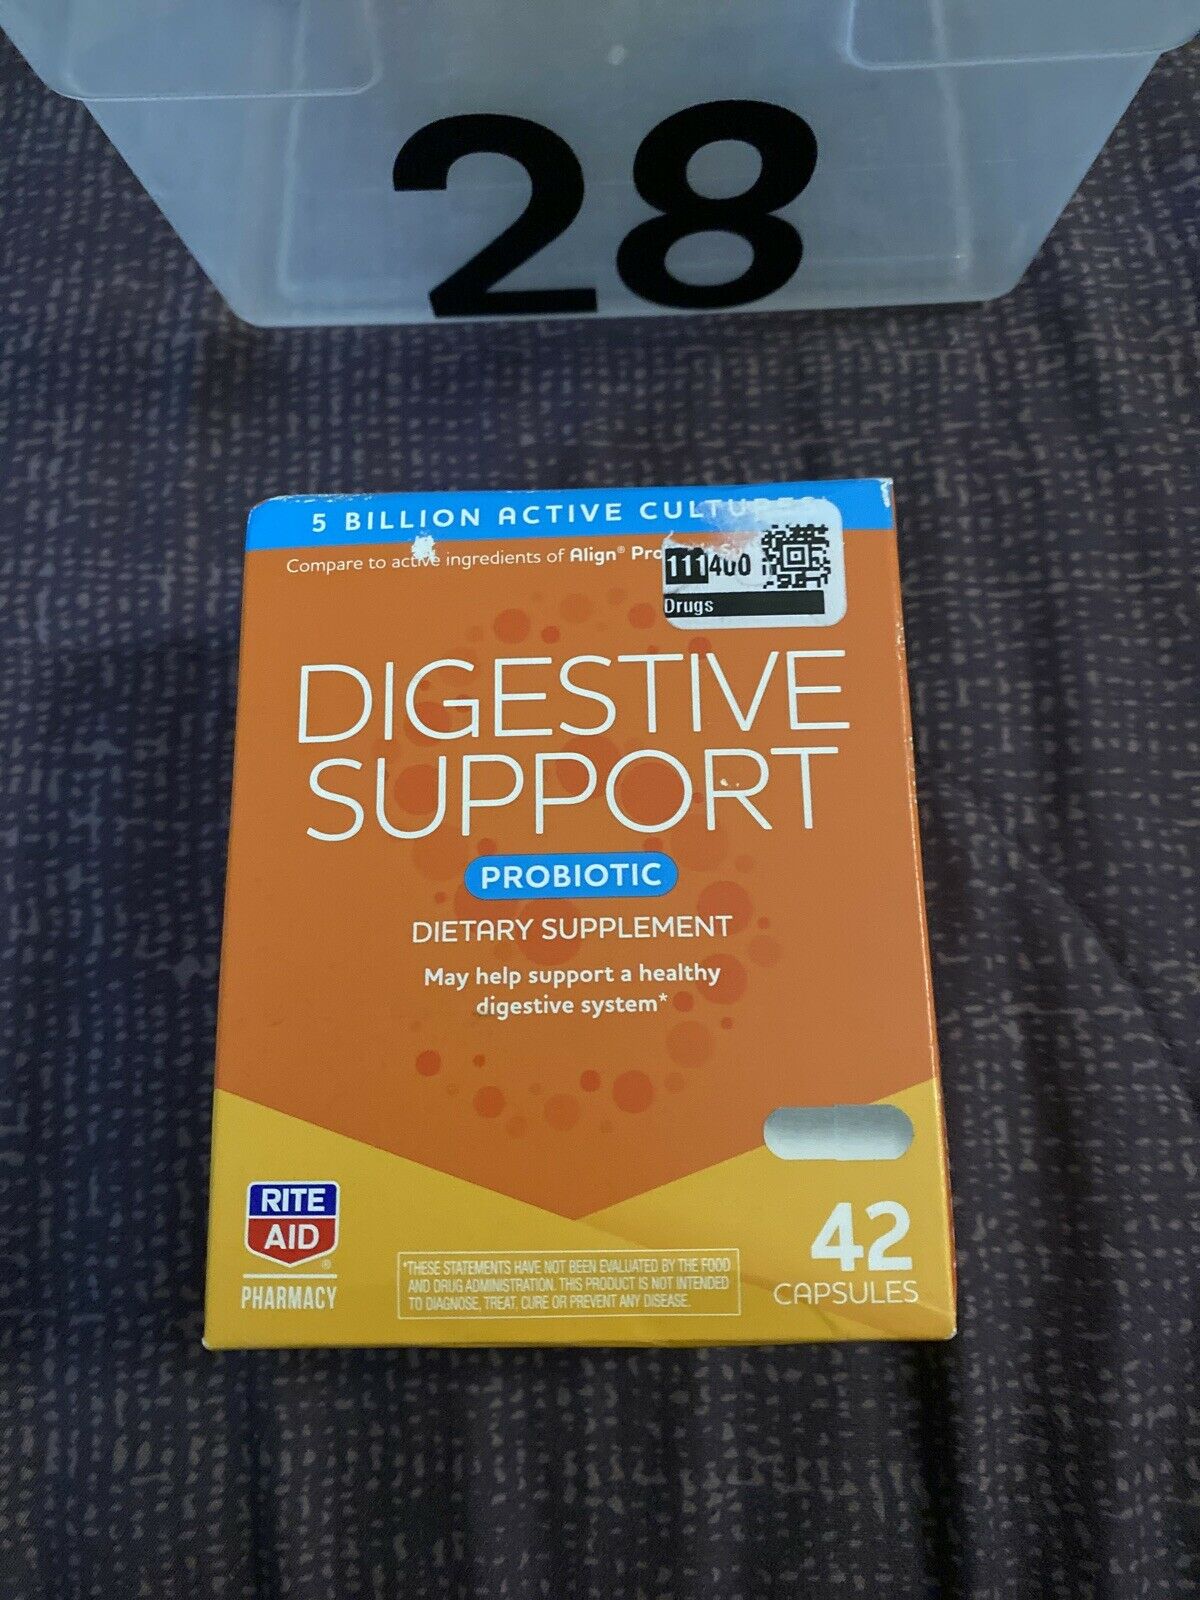 Digestive Support Probiotic Dietary Supplement 42 Capsules Rite Aid Exp. 9/20